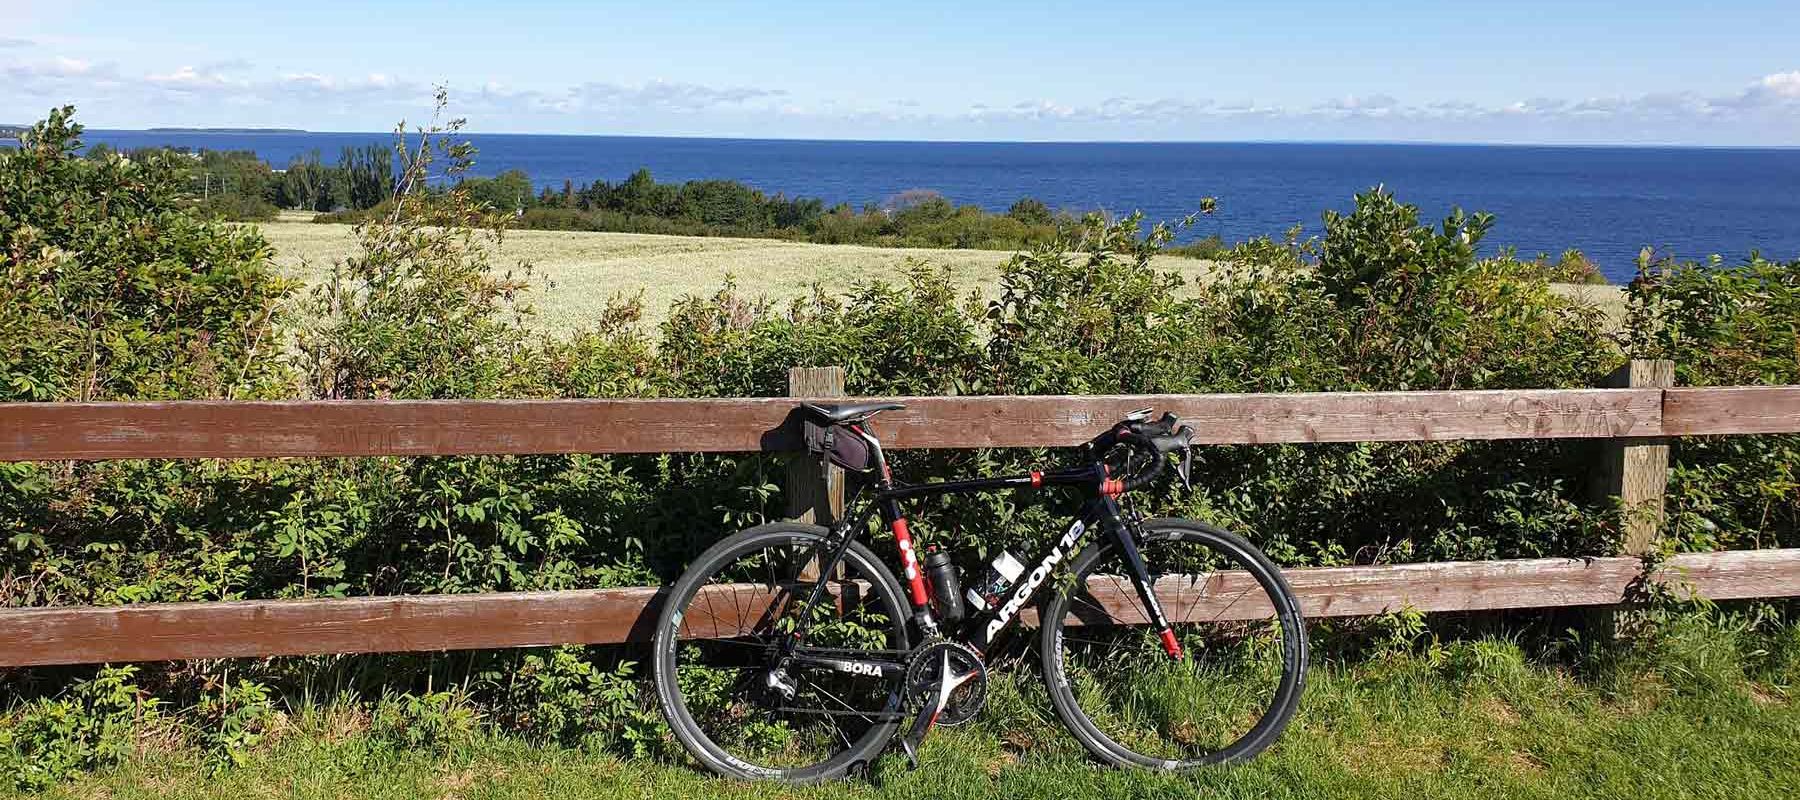 Bike set against fence as tourist takes cycling break in Lac Saint Jean Quebec